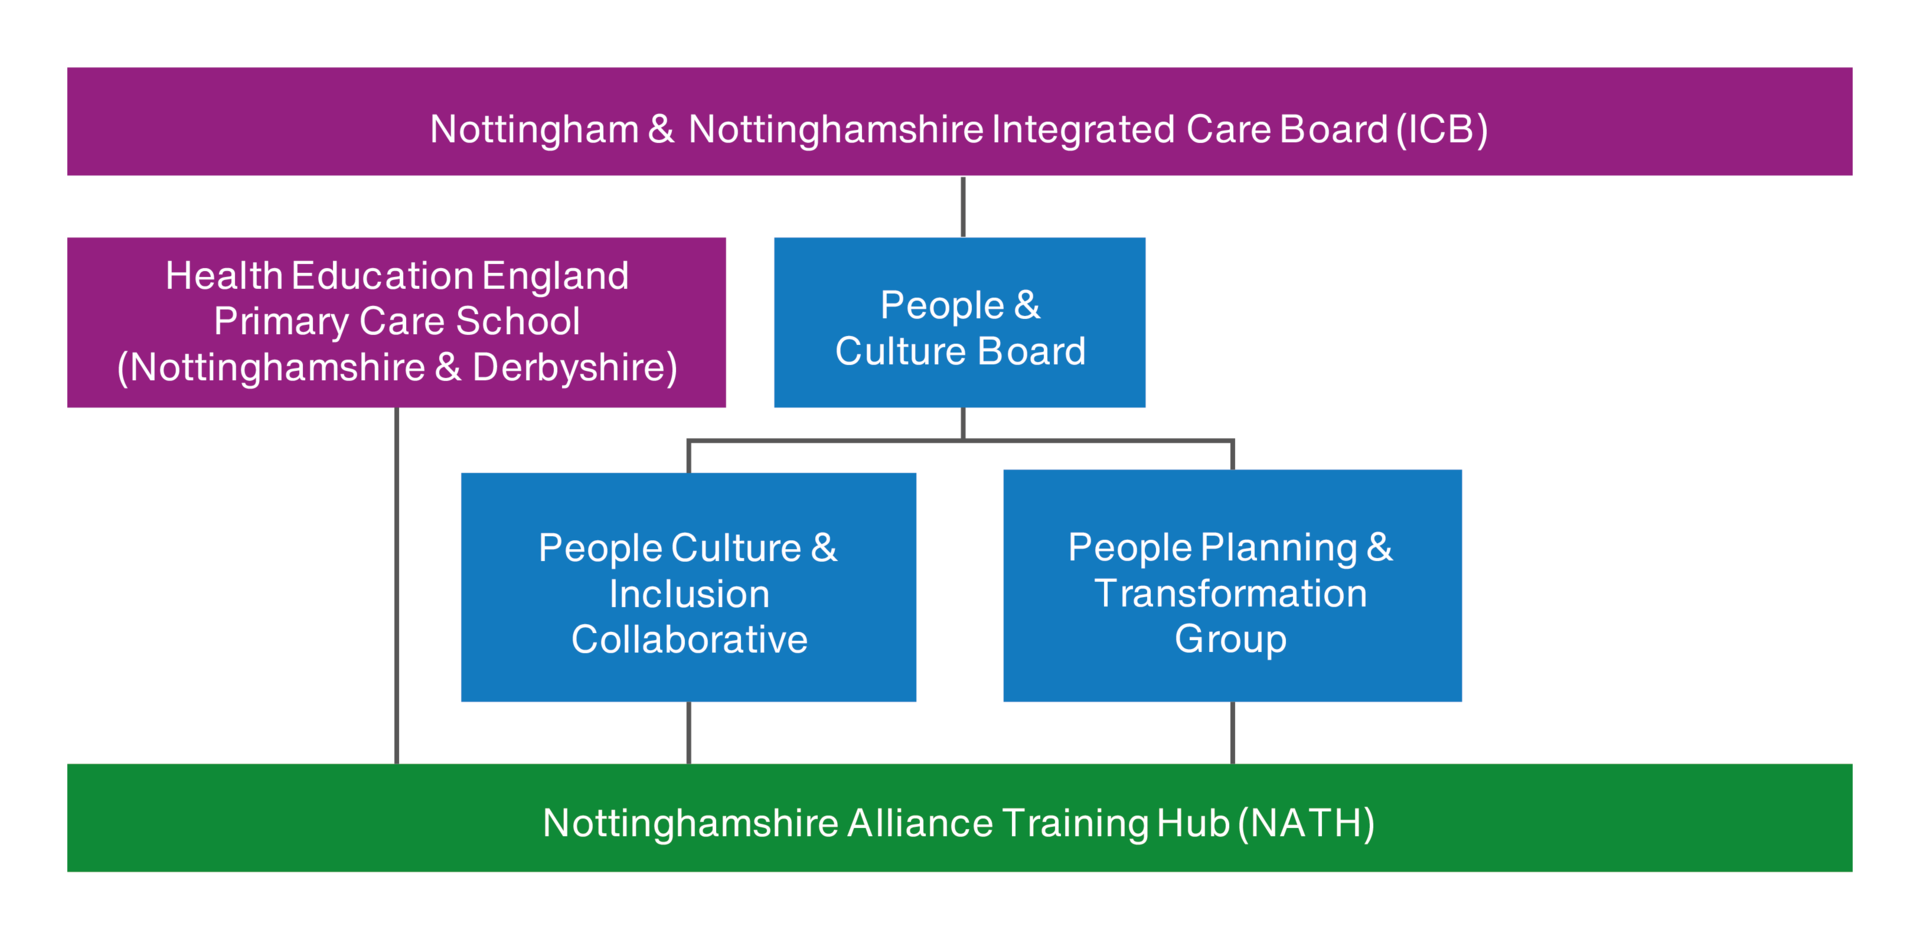 Nottinghamshire Alliance Training Hub (NATH) reports into (i) Health Education England Primary Care School (Nottinghamshire & Derbyshire), (ii) People Culture & Inclusion Collaborative, and (iii) People Planning & Transformation Group. (ii) and (iii) report into the People & Culture Board, which feeds into Nottingham & Nottinghamshire Integrated Care Board (ICB)